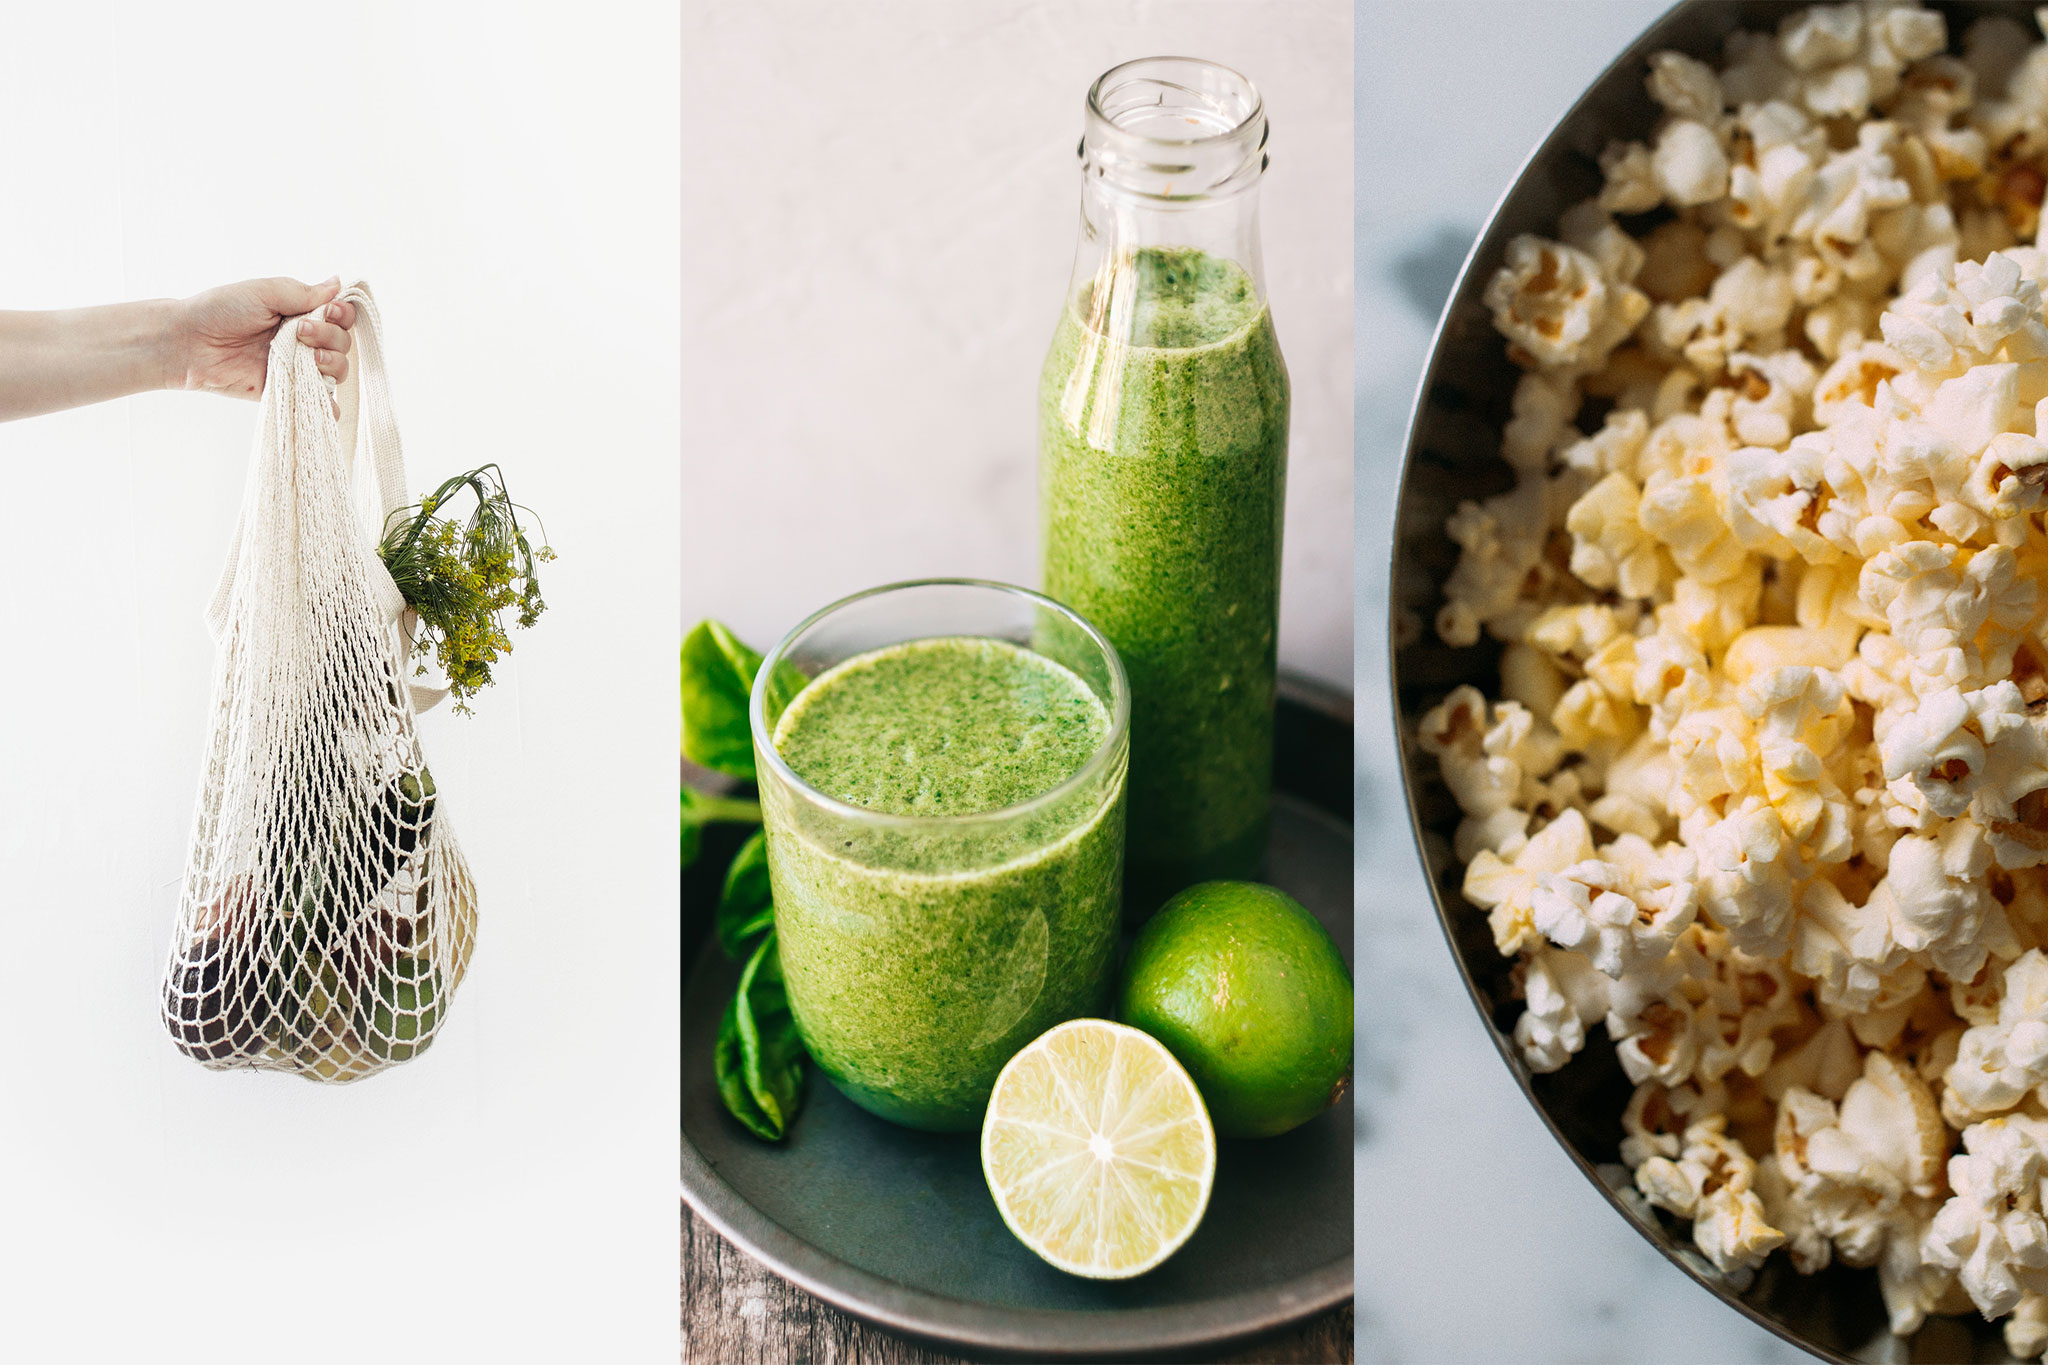 Three images in one to showcase Foodee's top three blog posts on food waste, juicing diets, and popcorn for movie night